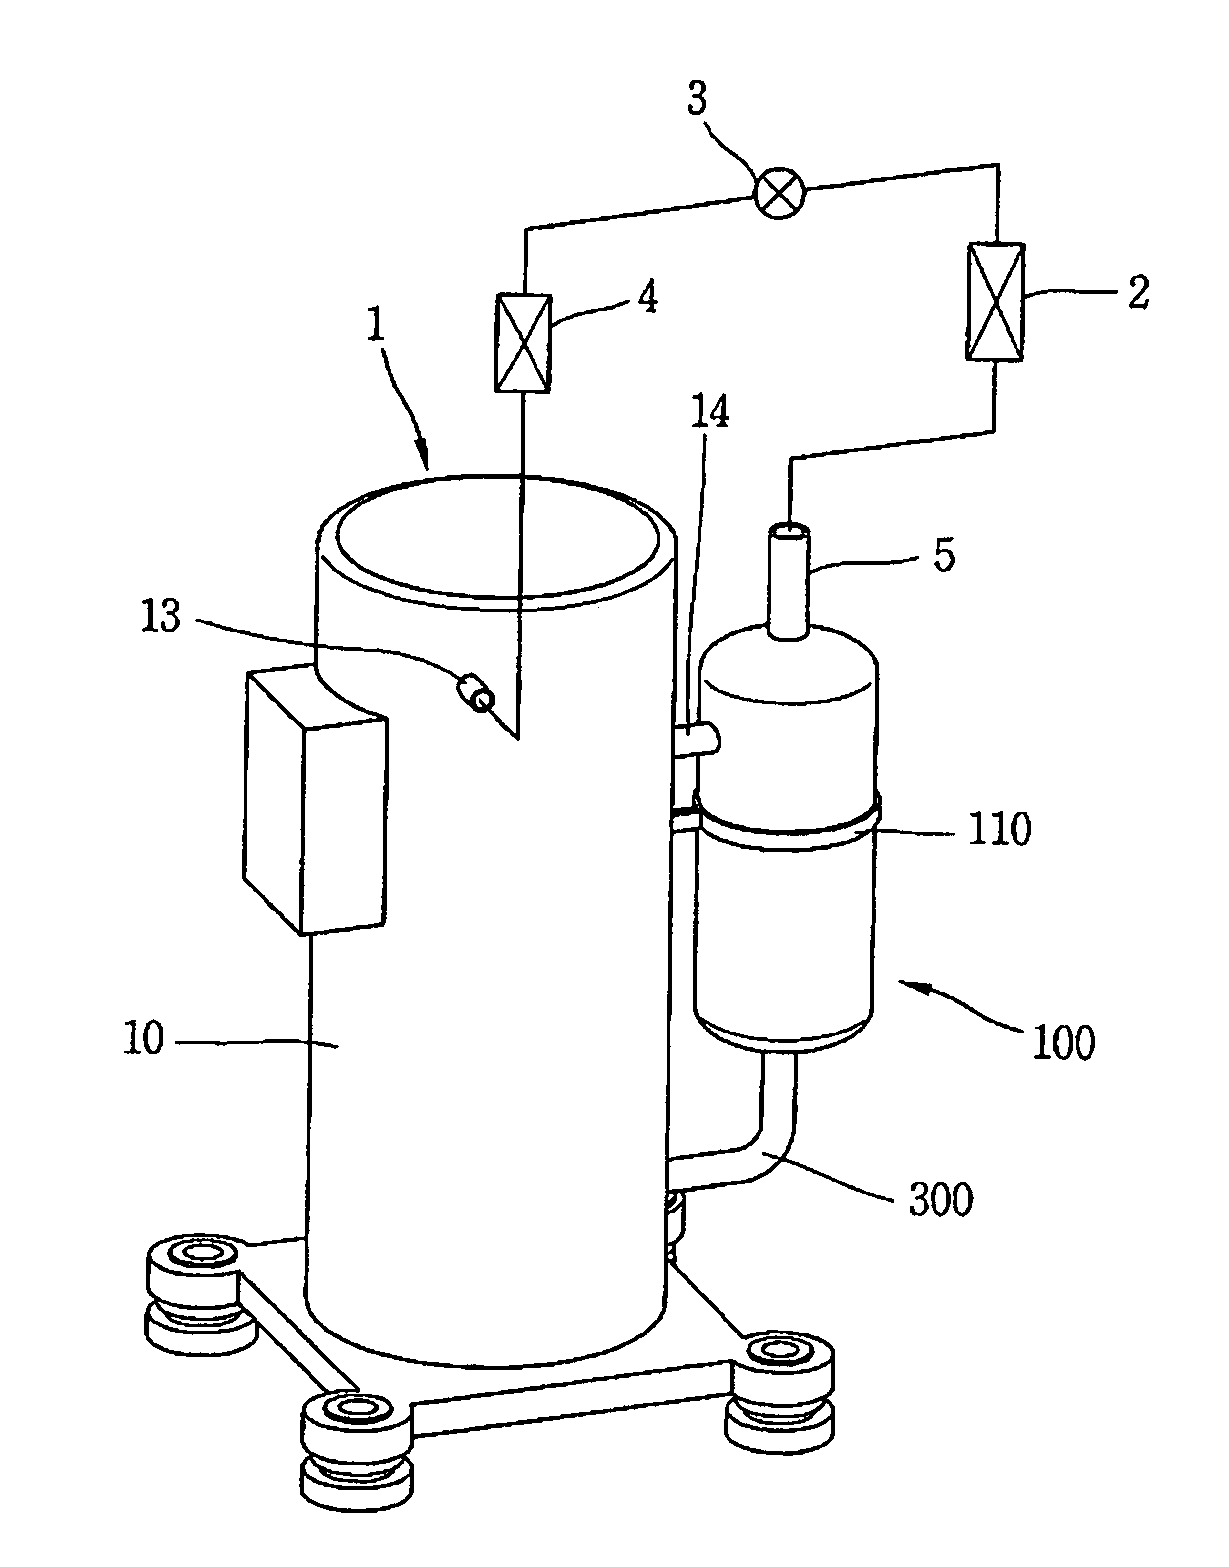 Hermetic compressor and refrigeration cycle device having the same